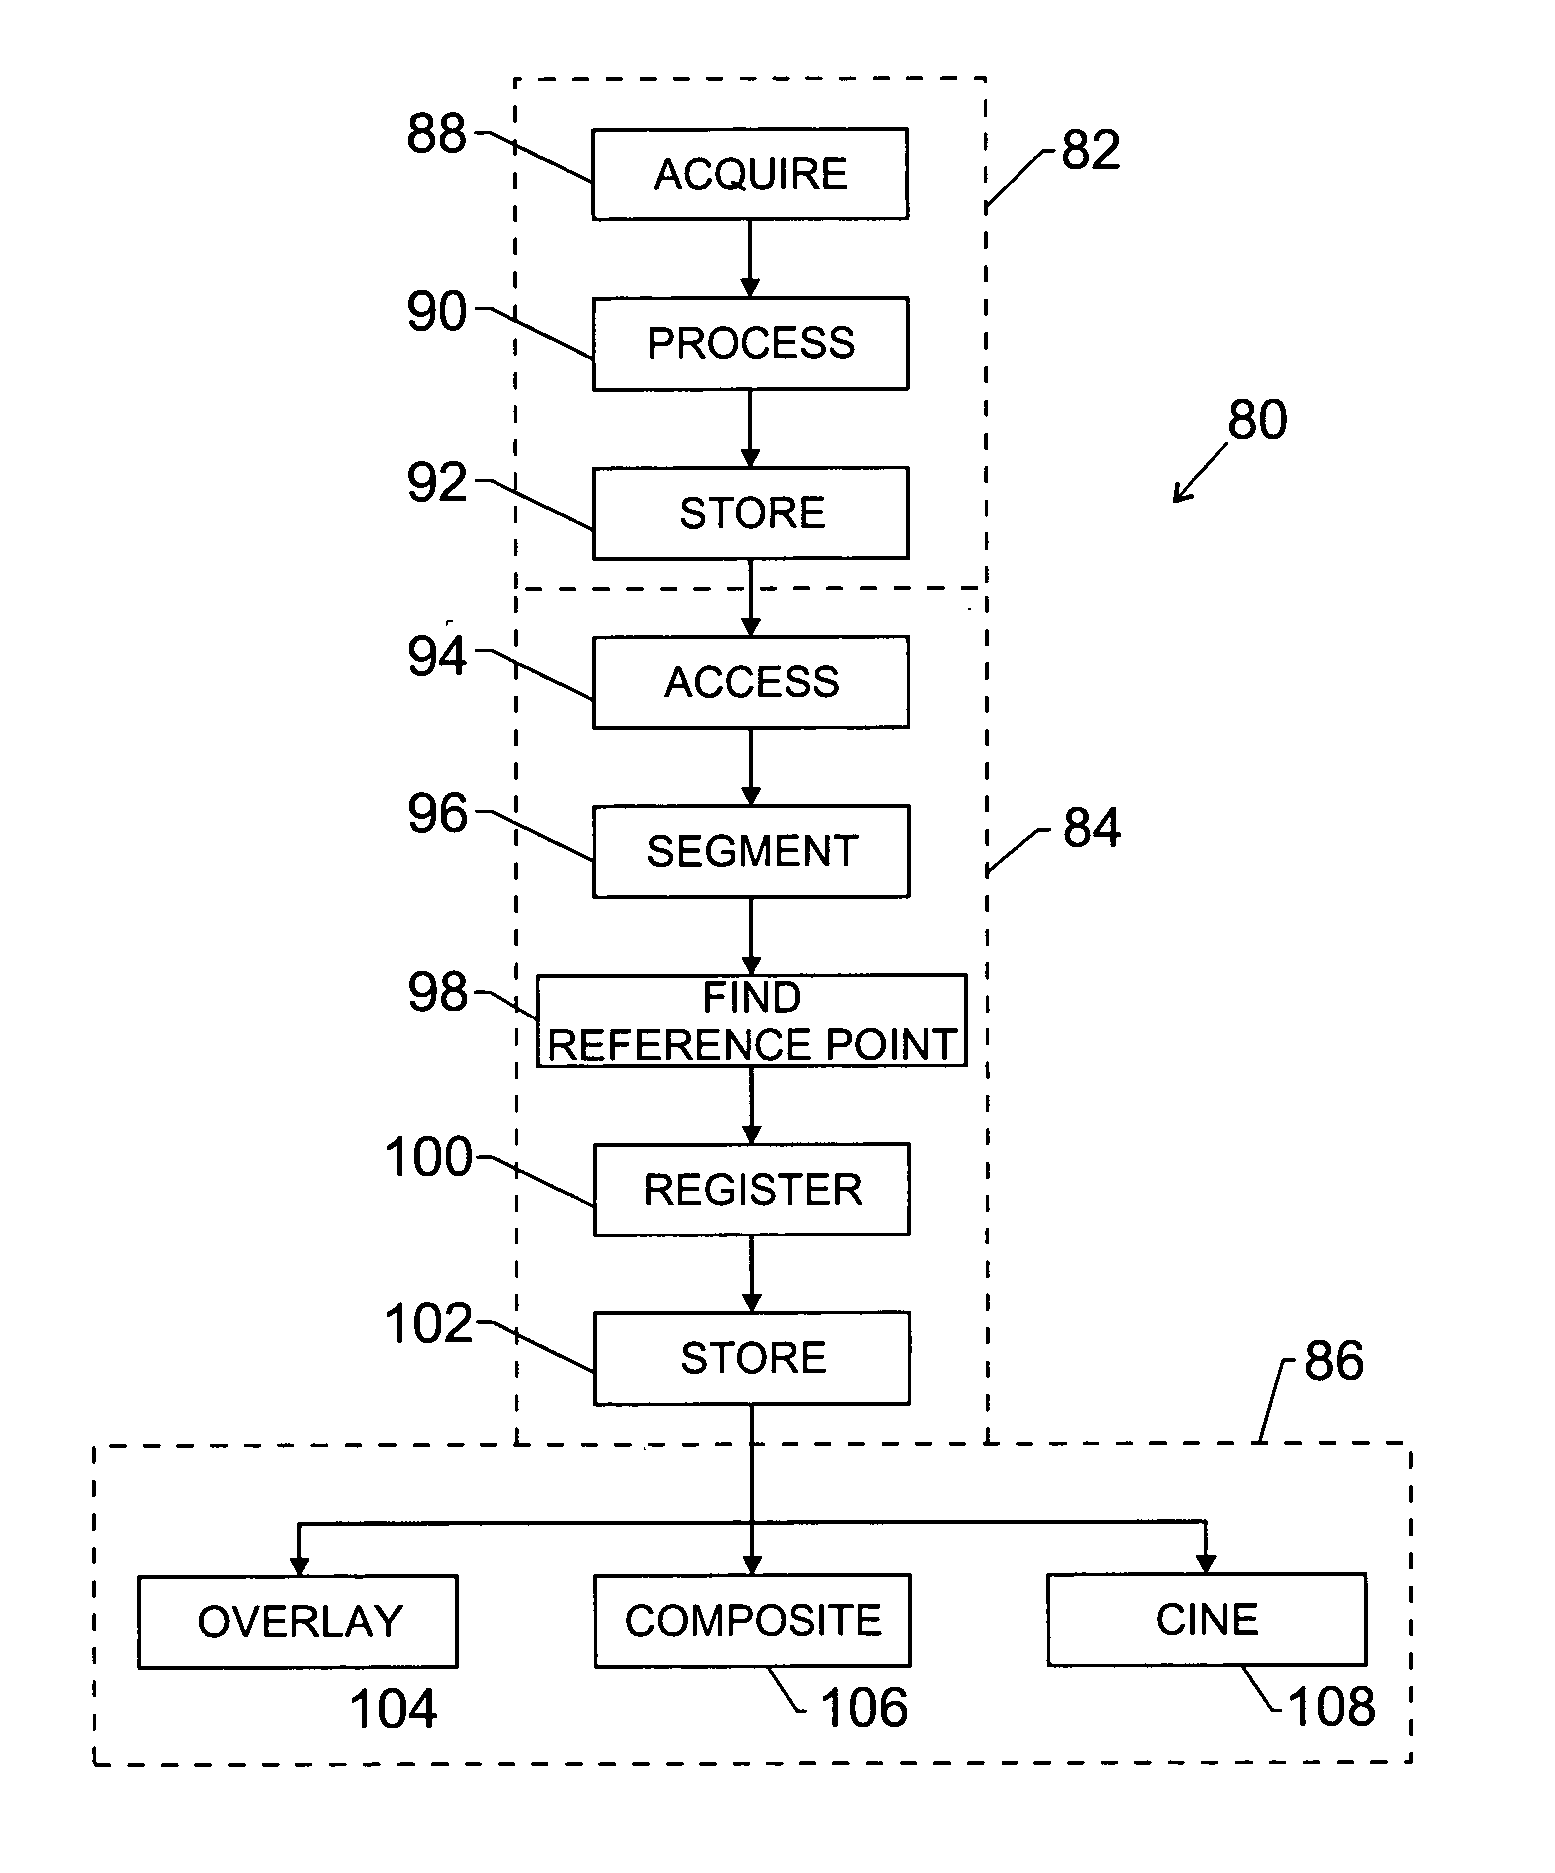 Auto-image alignment system and method based on identified anomalies